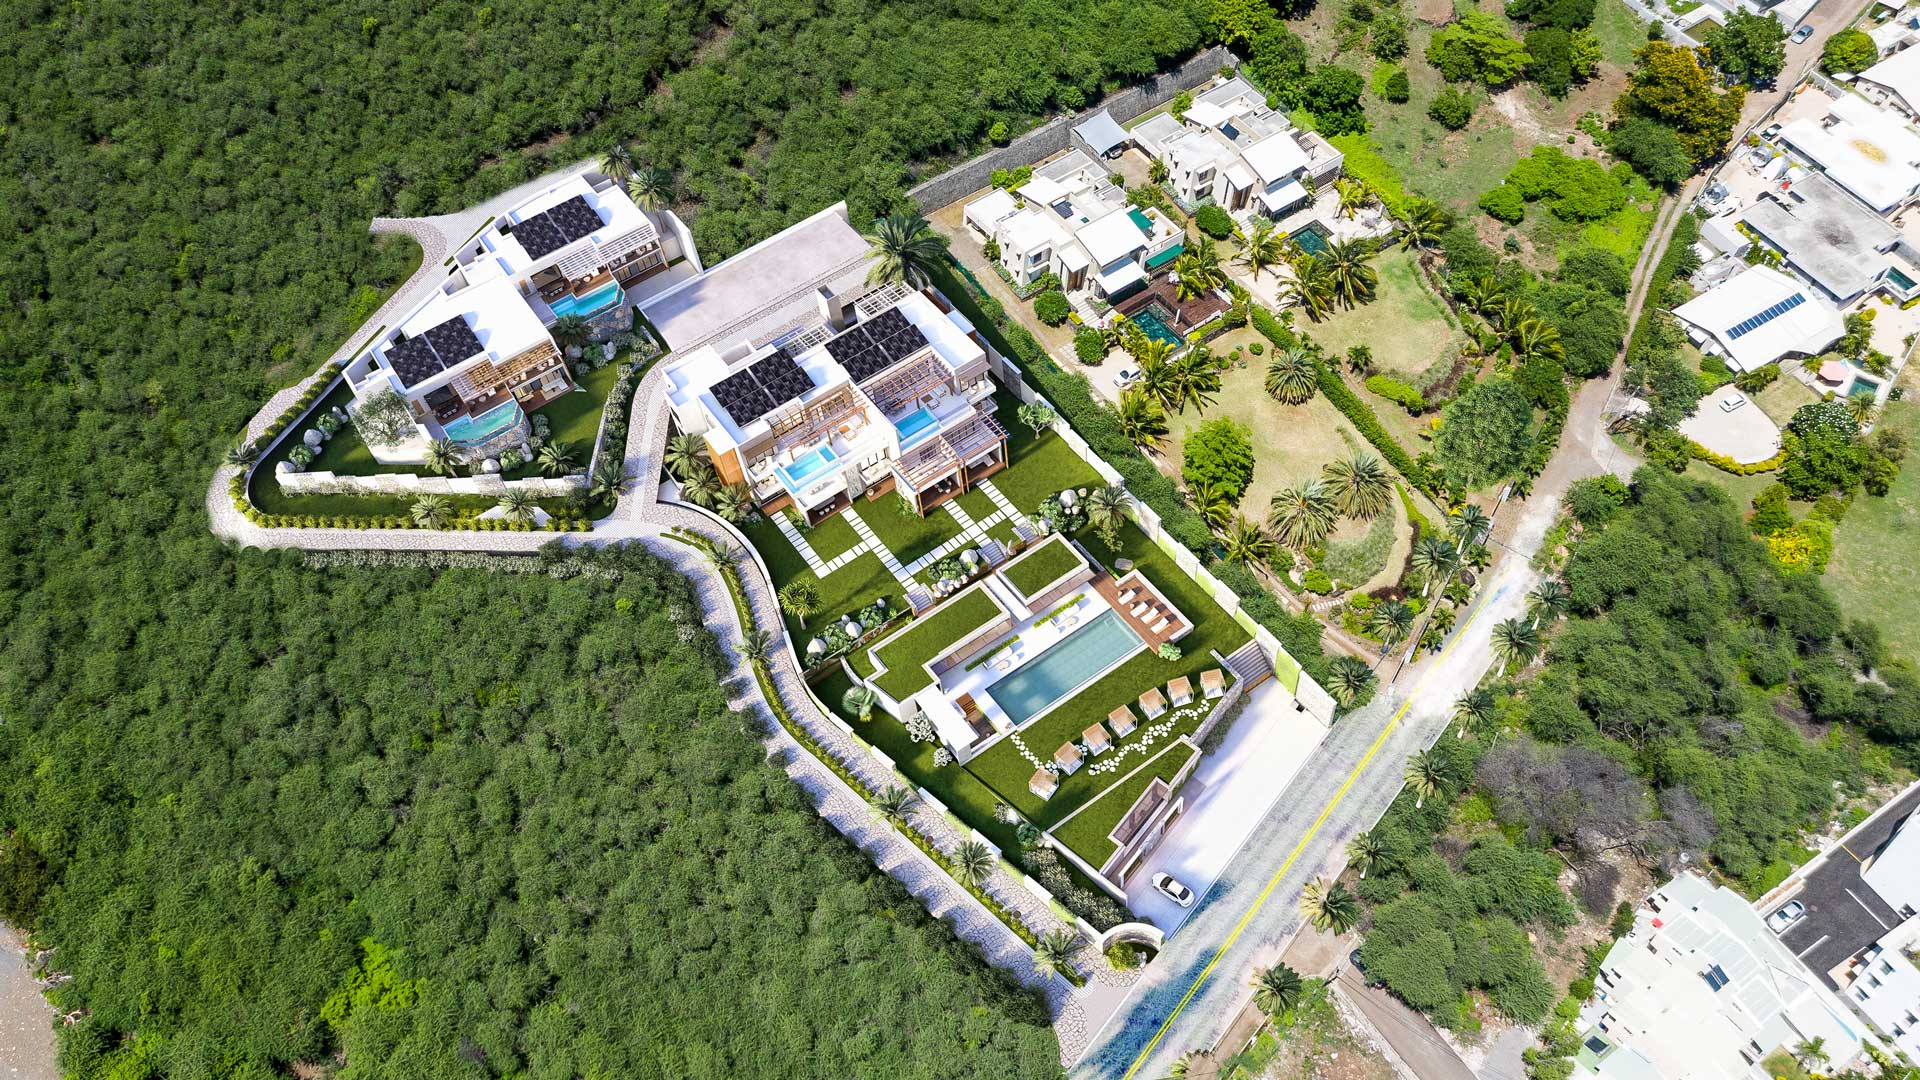 Aerial view of the luxury PDS AMARI BAY project in Tamarin, Mauritius by Westimmo Luxury Real Estate Mauritius